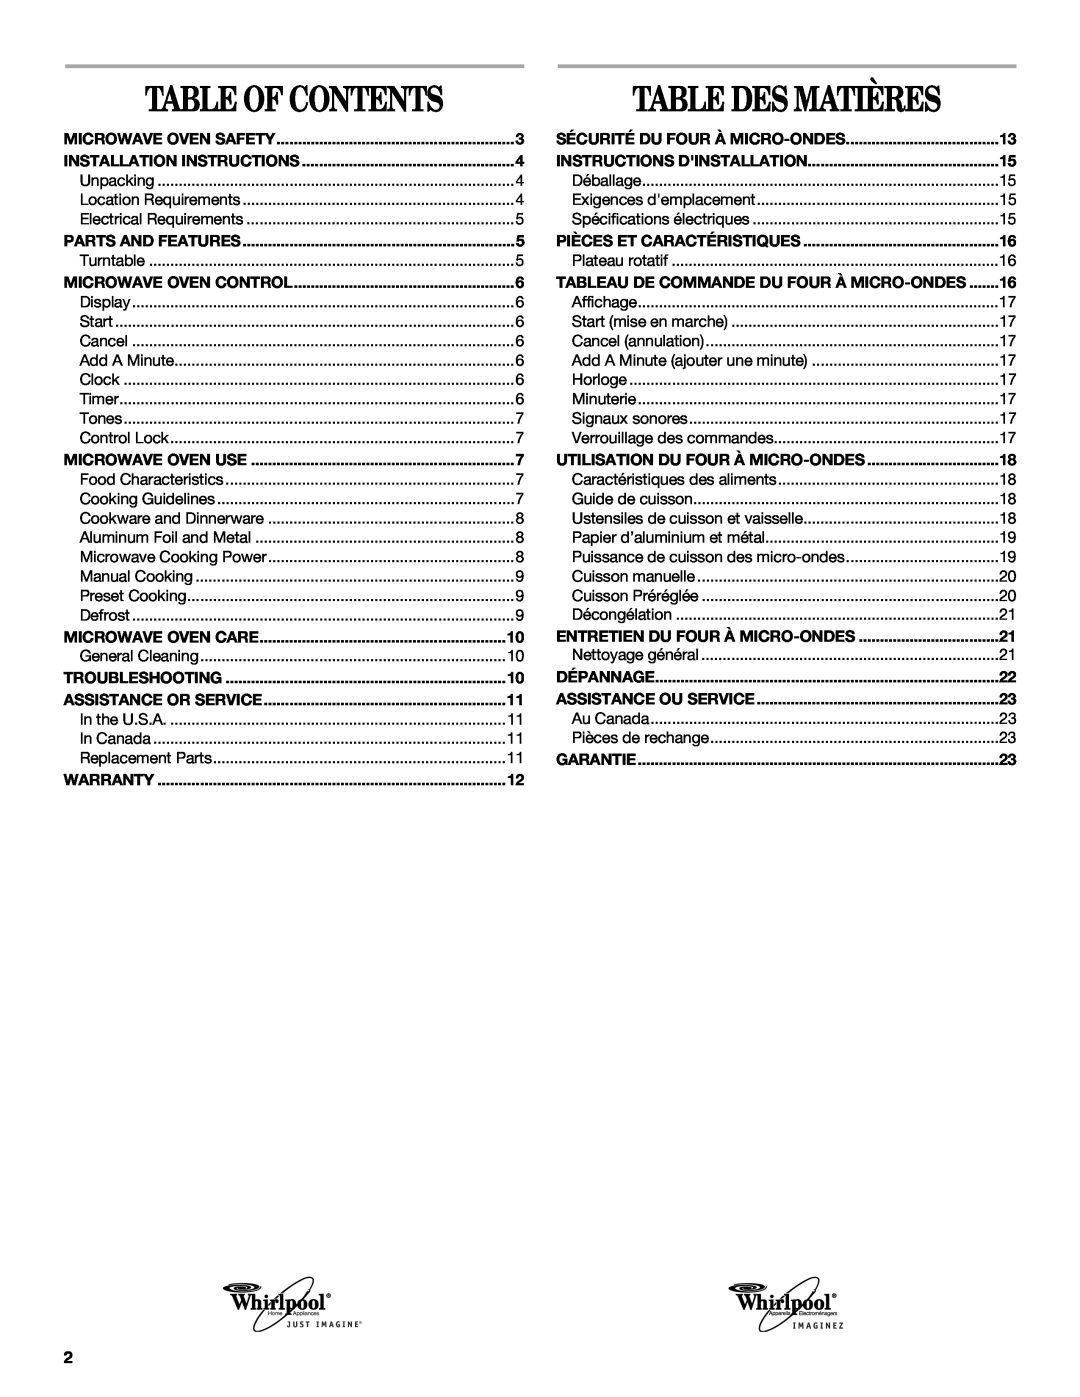 Whirlpool WMC1070 manual Table Des Matières, Table Of Contents 